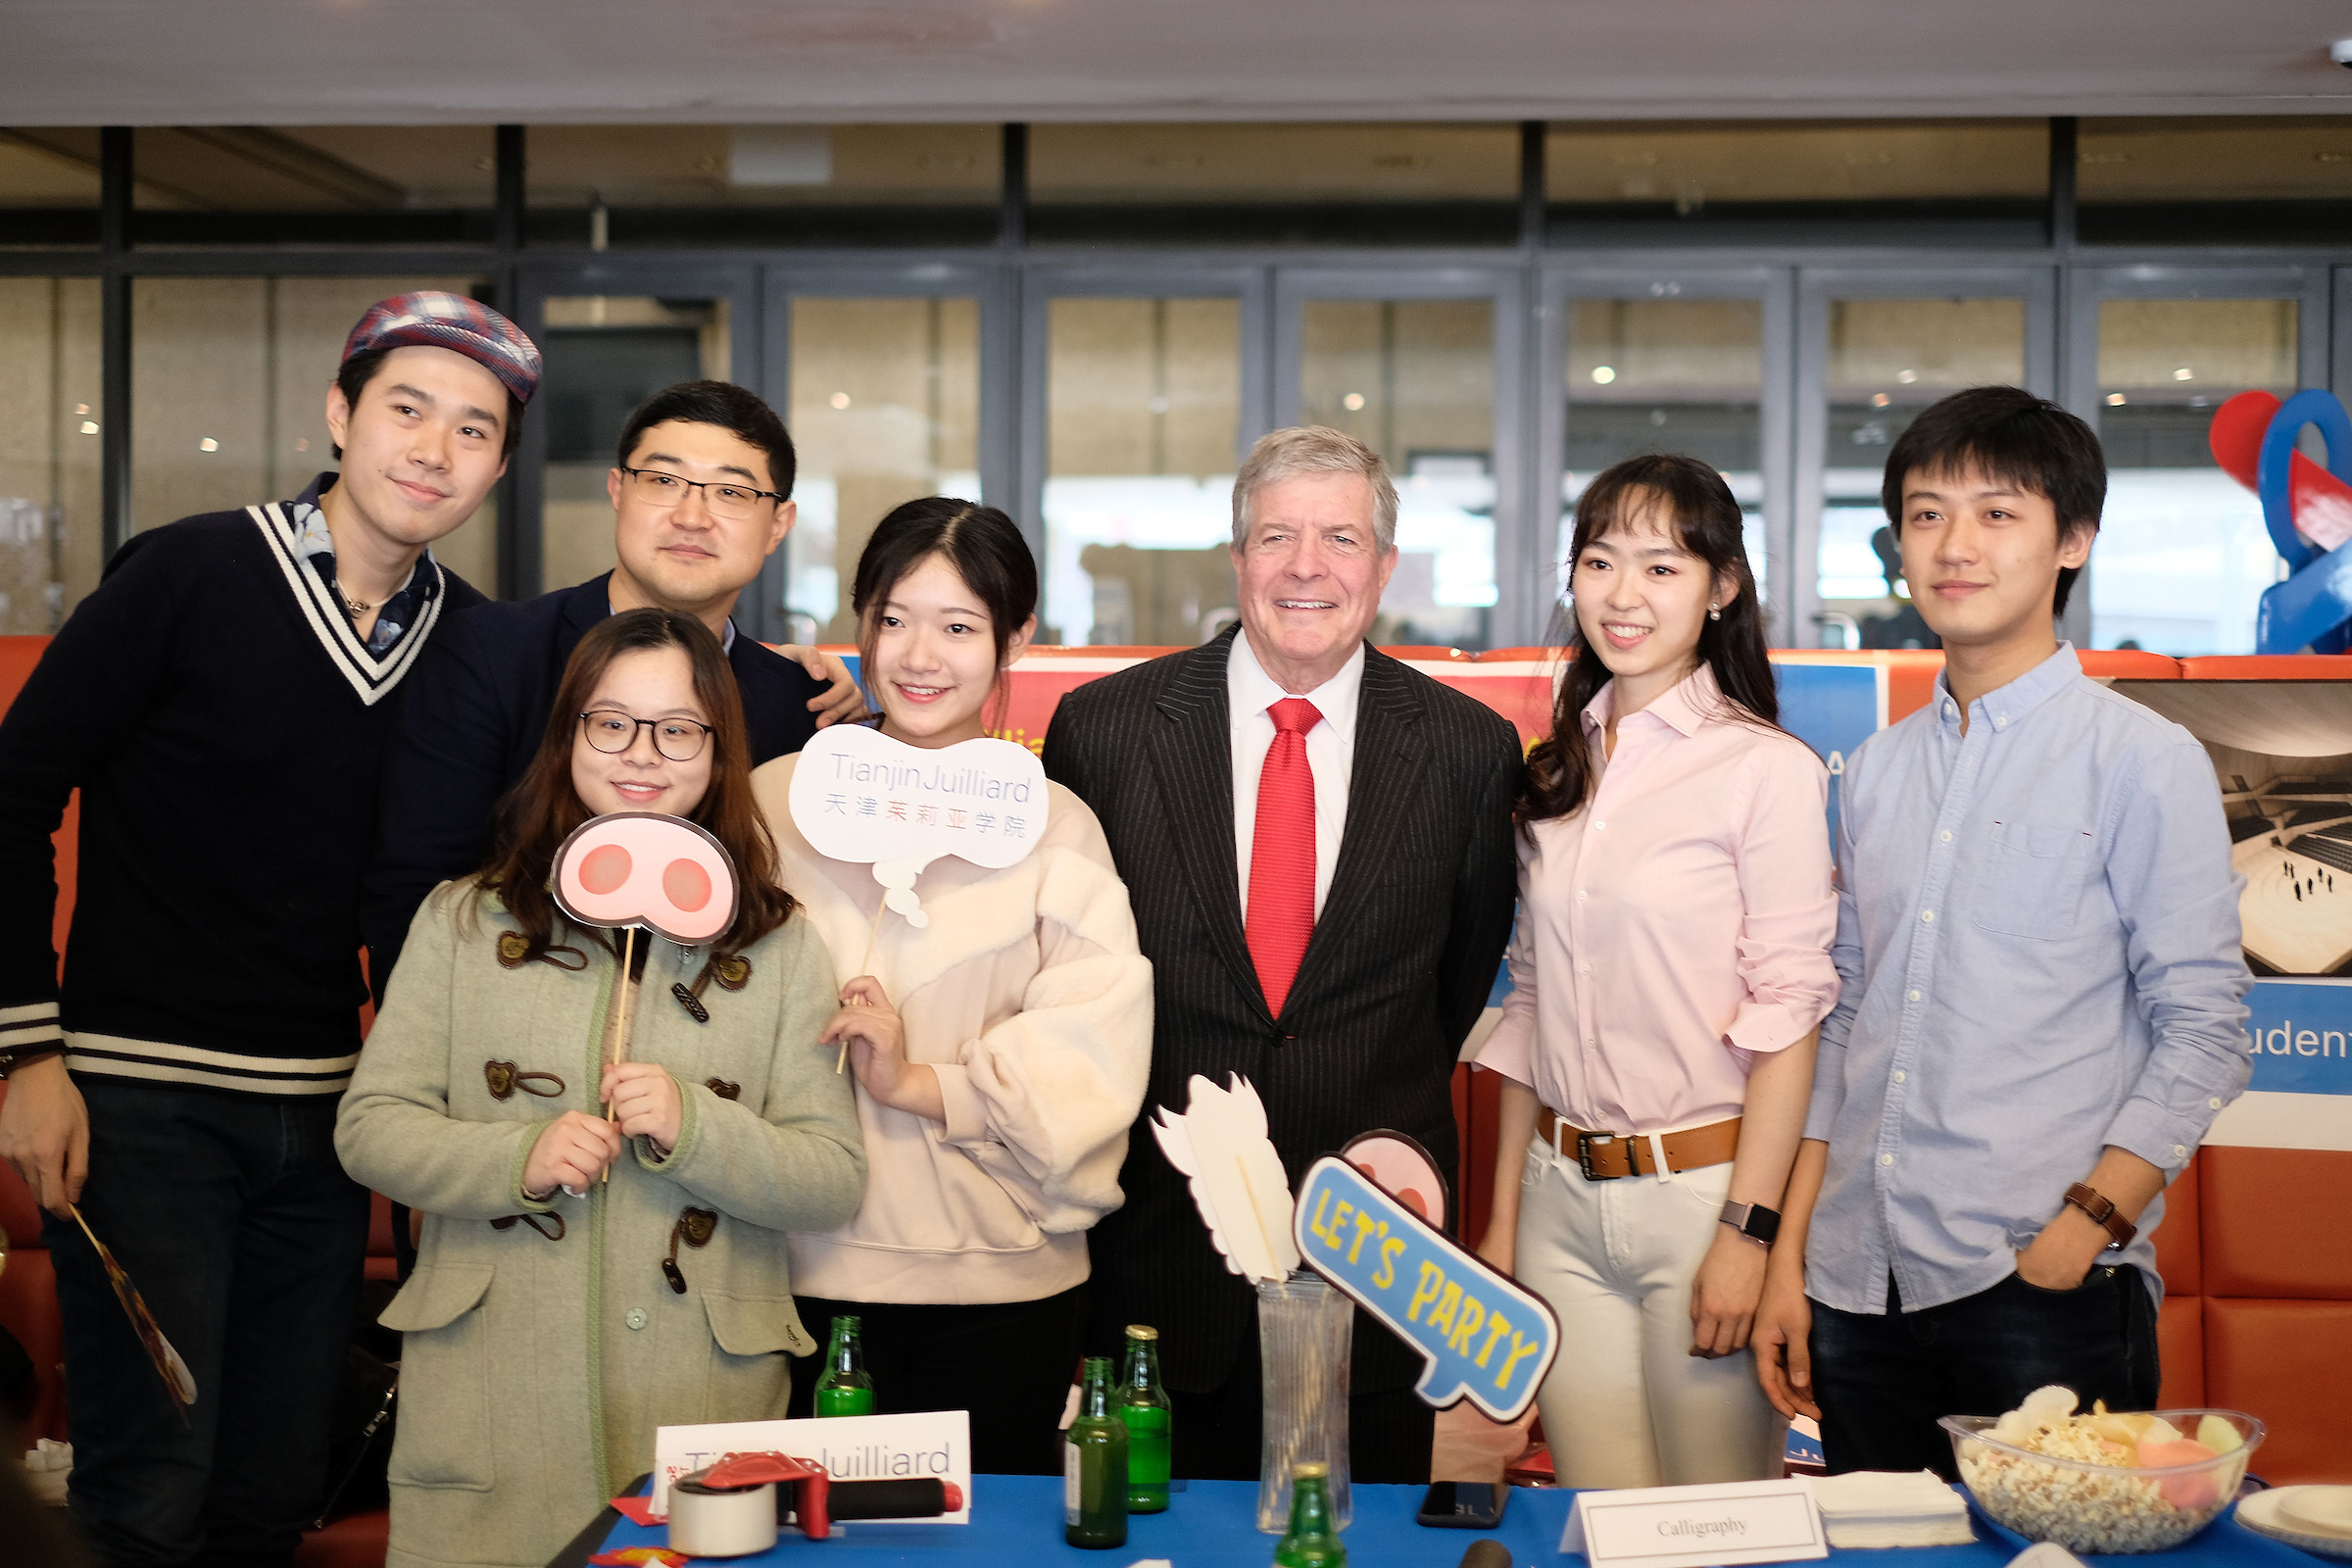 Juilliard students with Dr. Joseph W. Polisi at the 2019 Lunar New Year Celebration on campus in New York. Photo credit: Rachel Papo